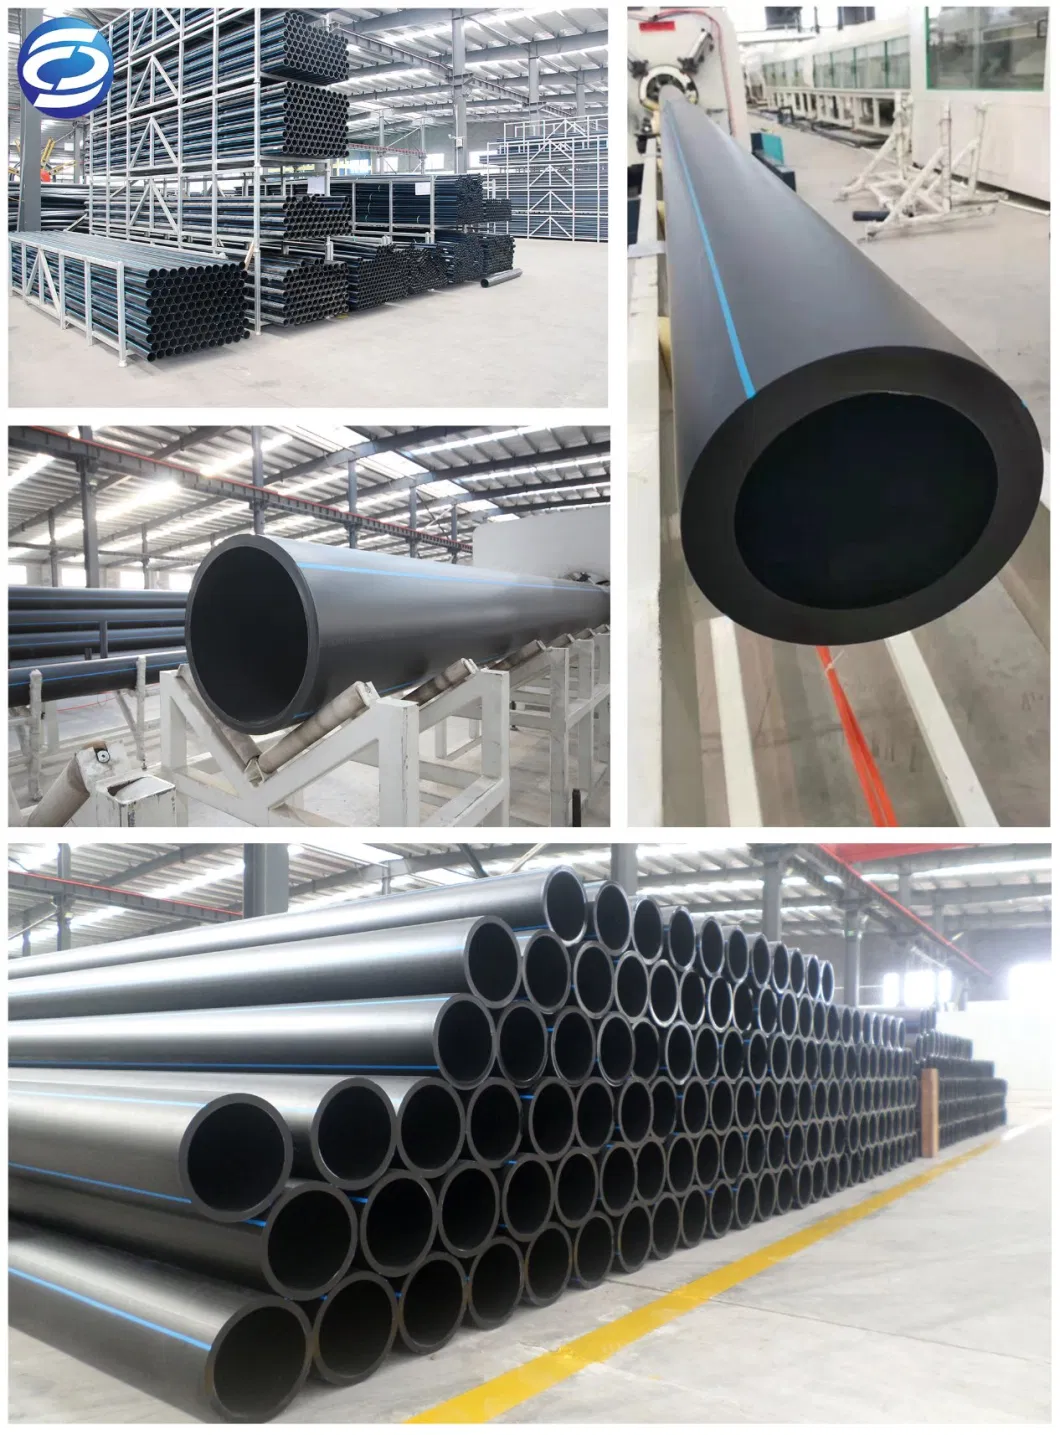 PE100 Material HDPE Pipe Polyethylene Pipes Pn6 SDR 21 17 13.6 DN200mm Black HDPE Wate Pipe